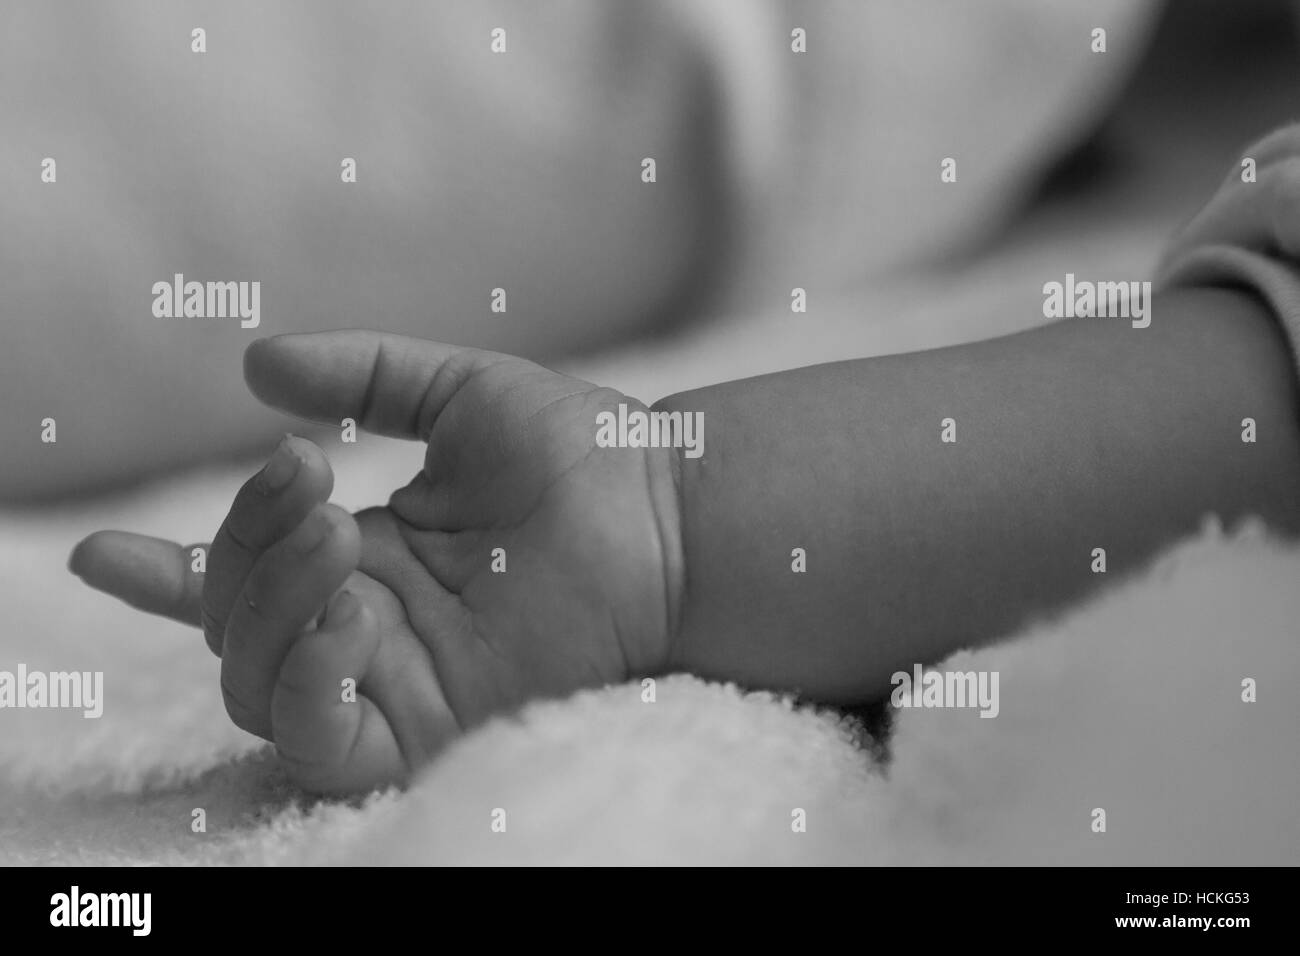 Arm of a slept baby, it transmits easing and rest Stock Photo